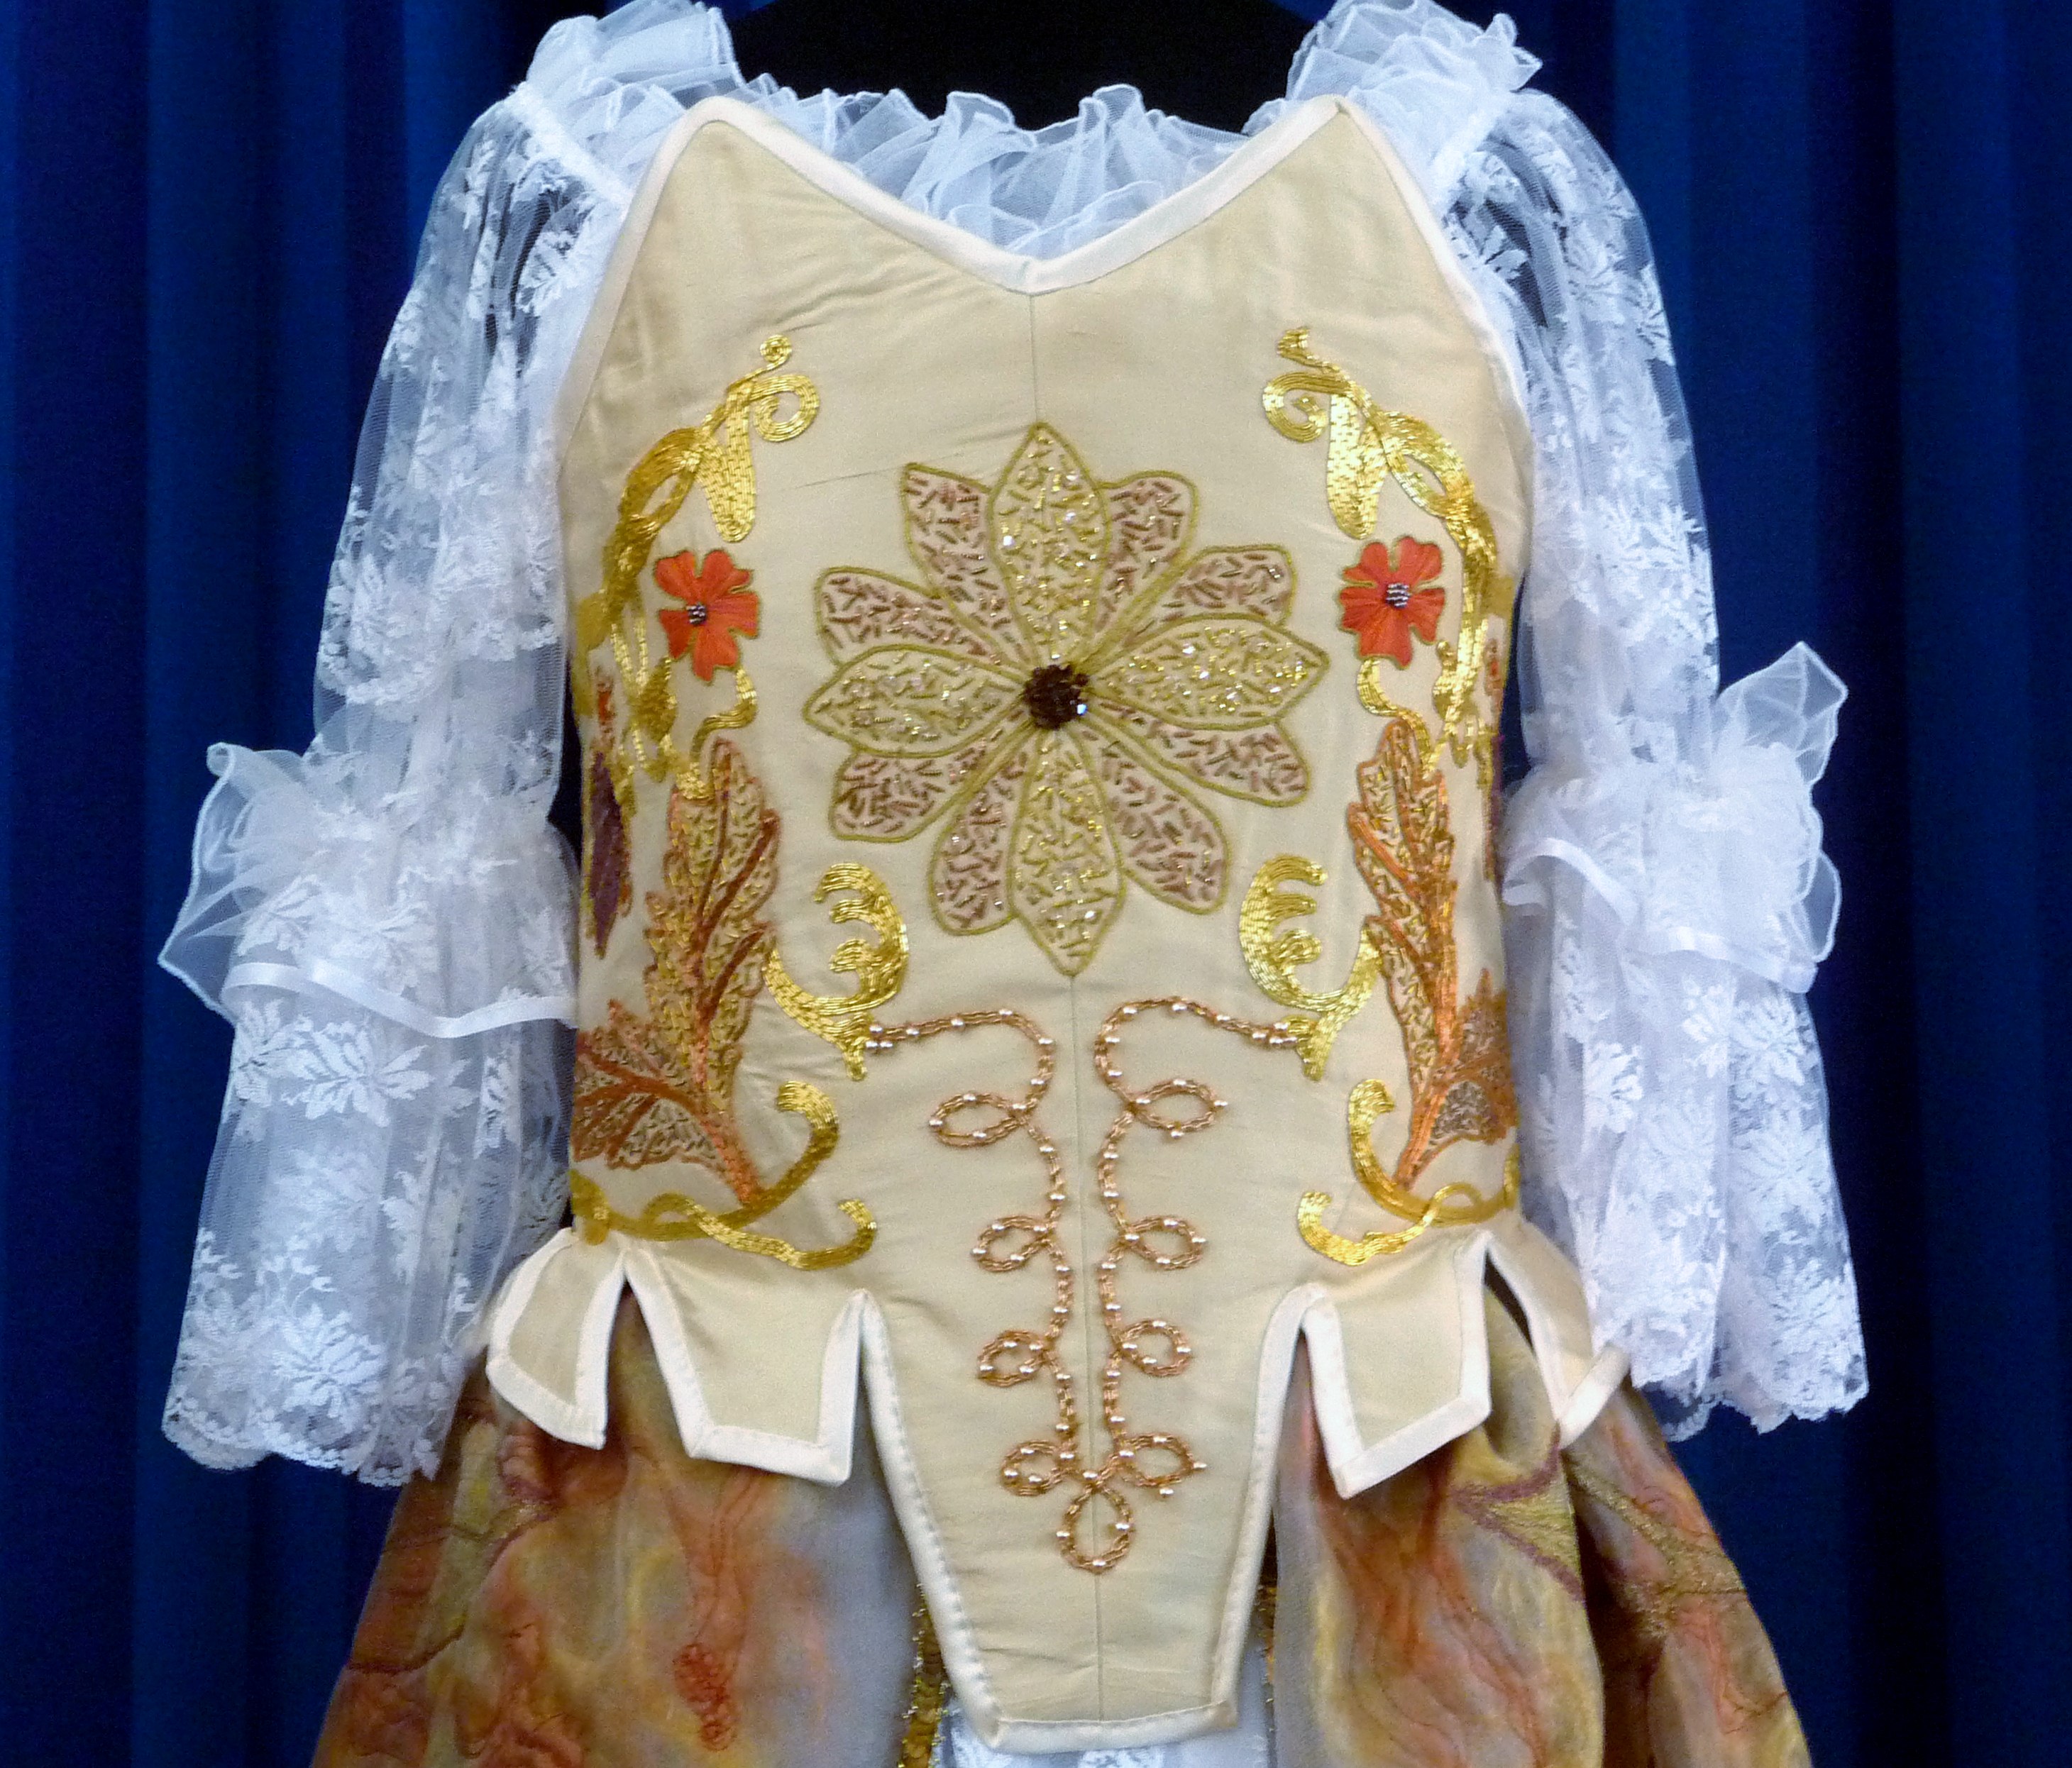 detail of corset made by Gill Roberts. 2015 NW Regional Rose Bowl First Prize winner